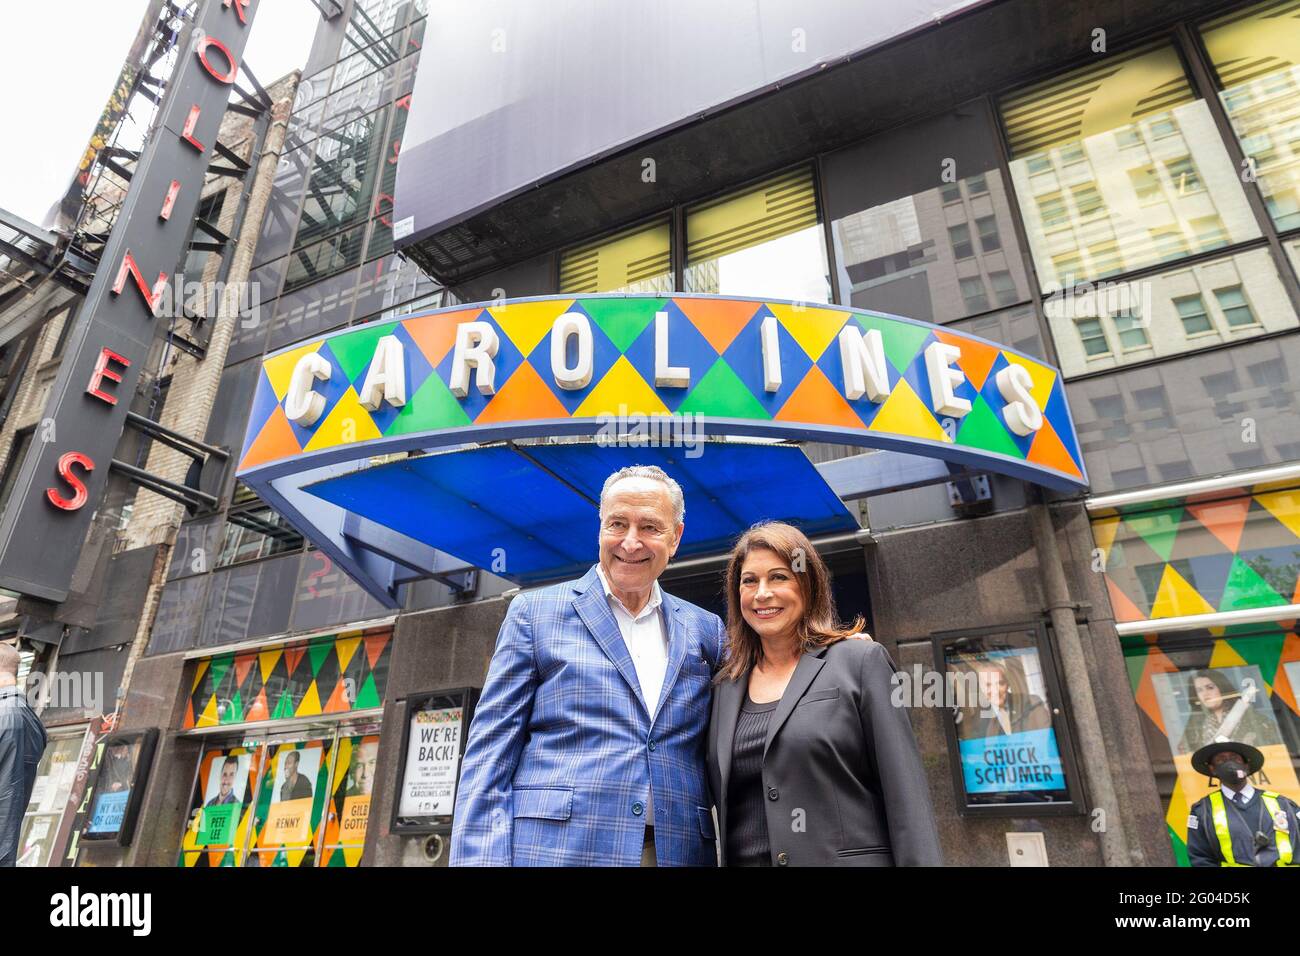 New York, United States. 31st May, 2021. U. S. Senator Charles Schumer and Caroline Hirsch pose outside of Carolines on Broadway comedy club after re-opening ceremony. Senator Charles Schumer lauded Safe our Stages (SOS) bill passed by Senate to help cultural venues to survive pandemic. He also cracked few jokes saying it is comedy club he does not have a choice but say them. (Photo by Lev Radin/Pacific Press) Credit: Pacific Press Media Production Corp./Alamy Live News Stock Photo